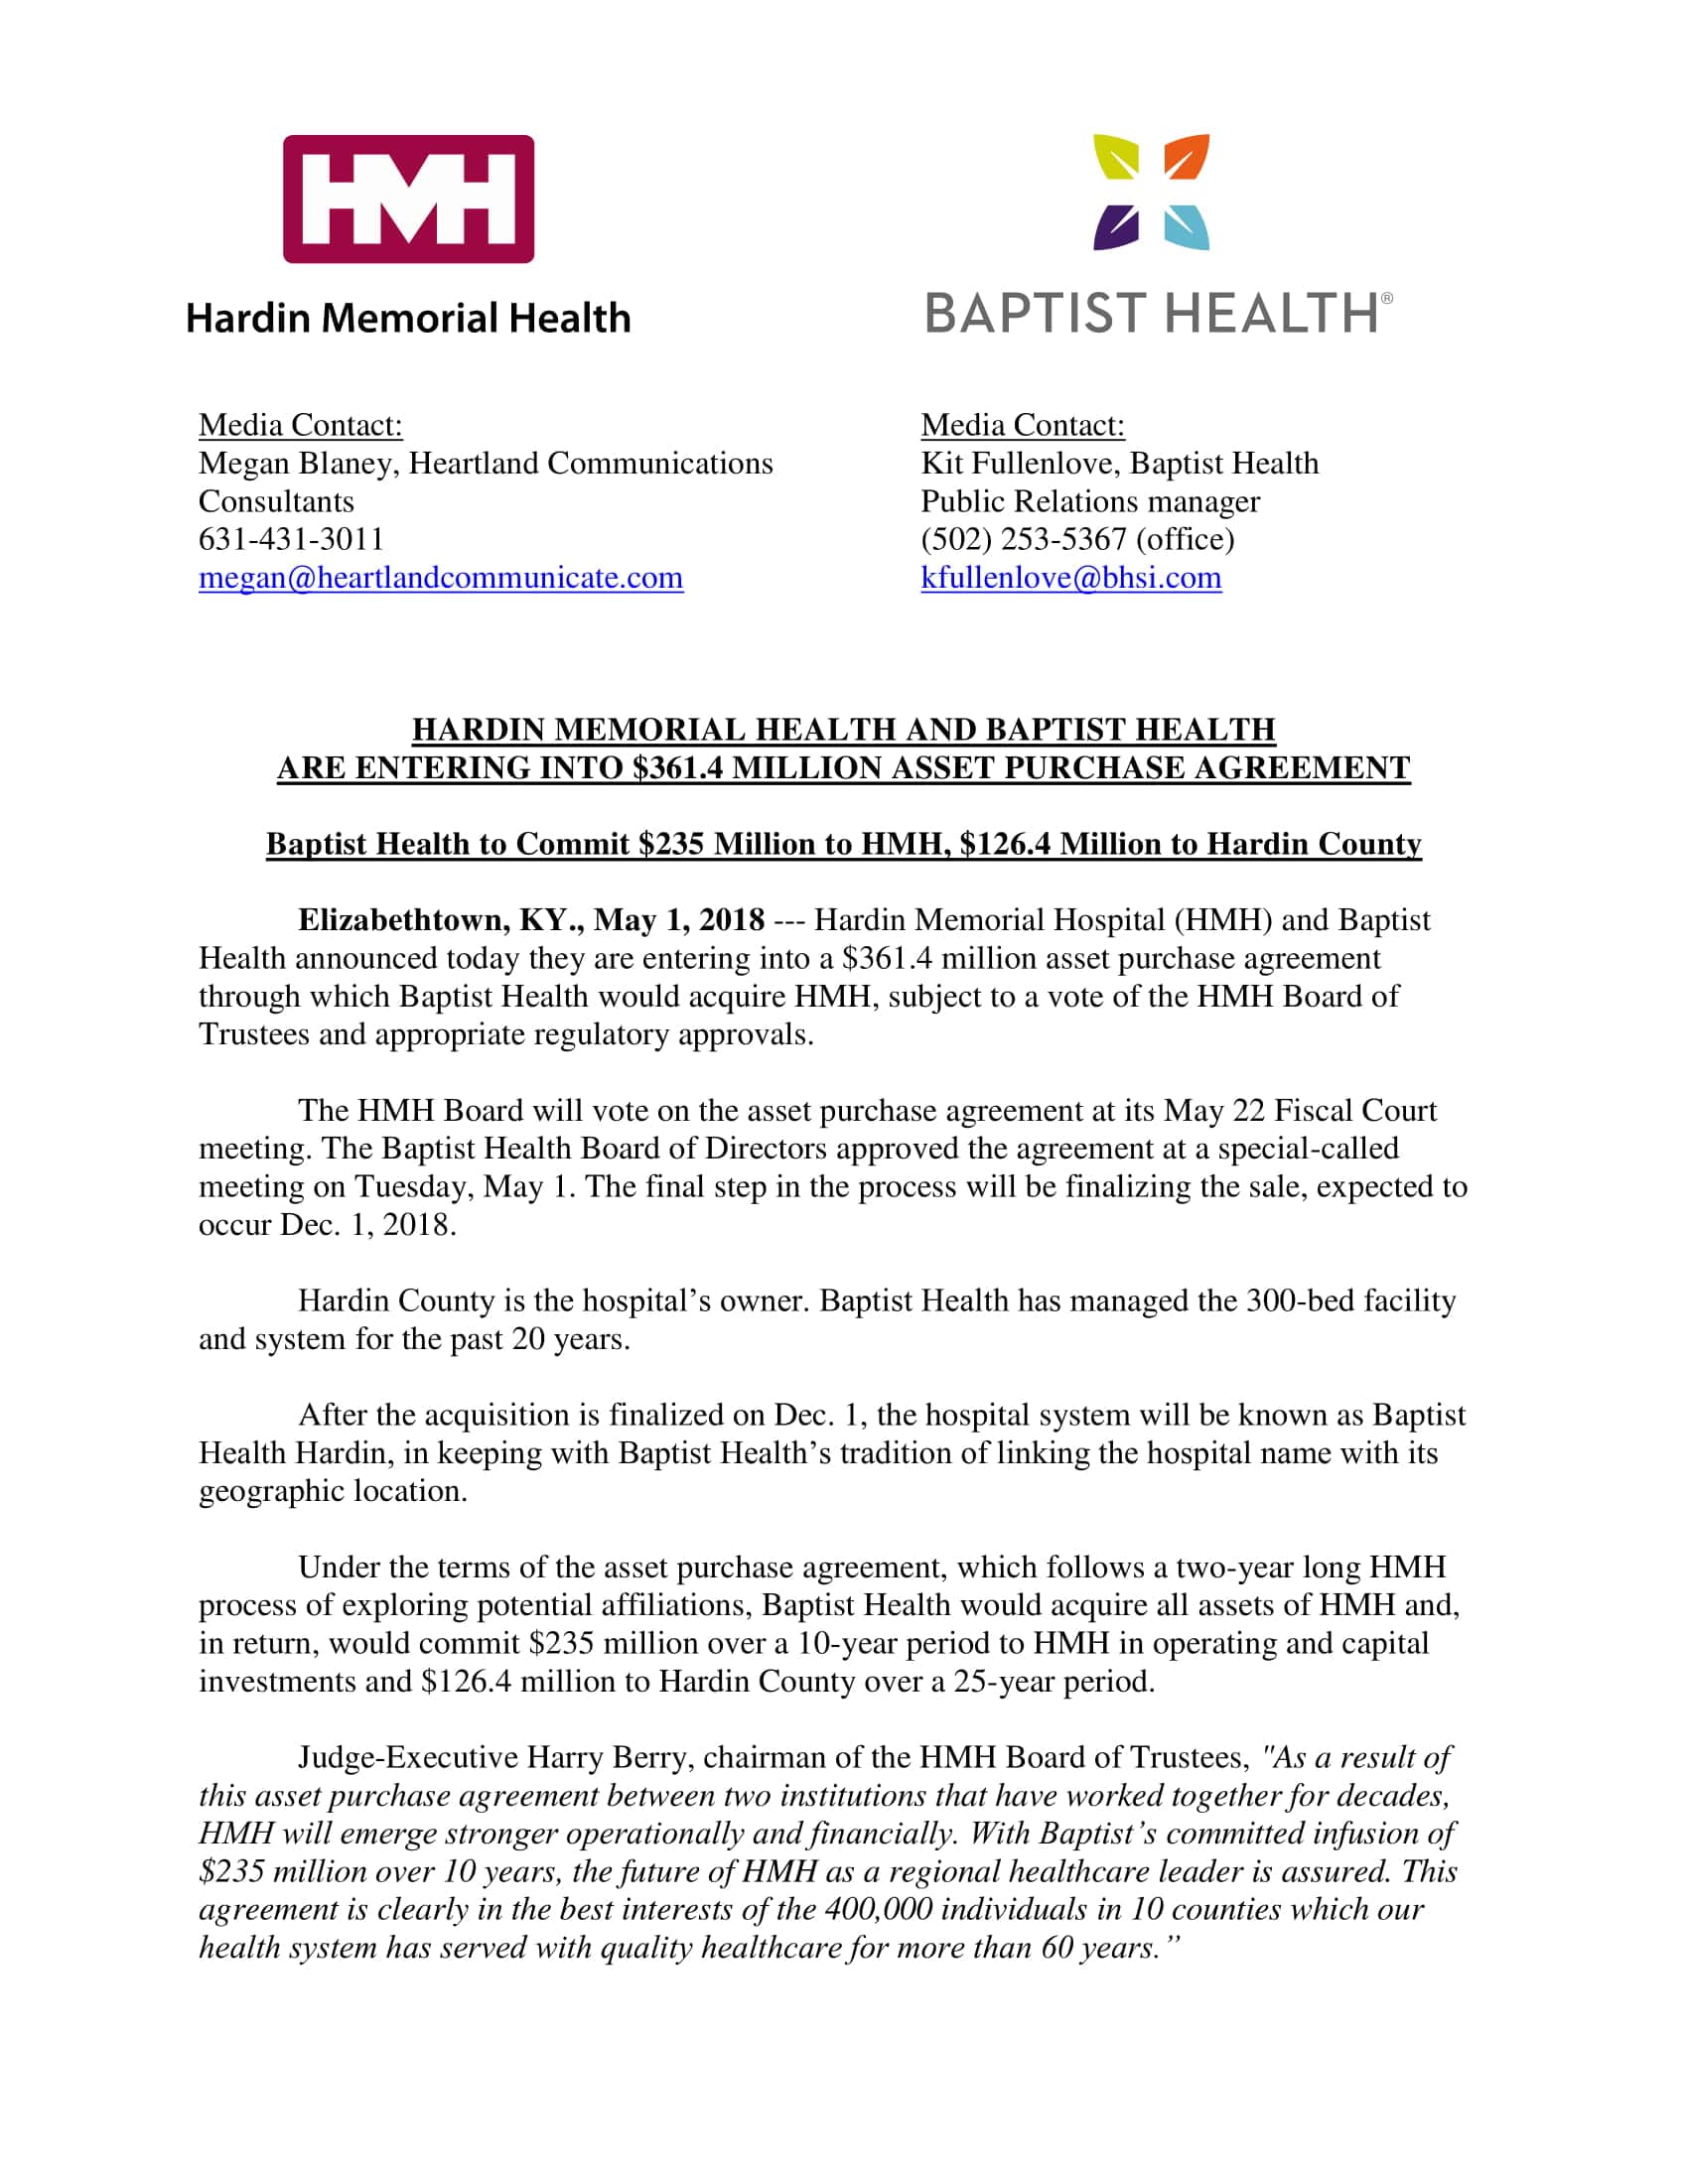 Hmh And Baptist Health Entering A 361 4 Million Purchase